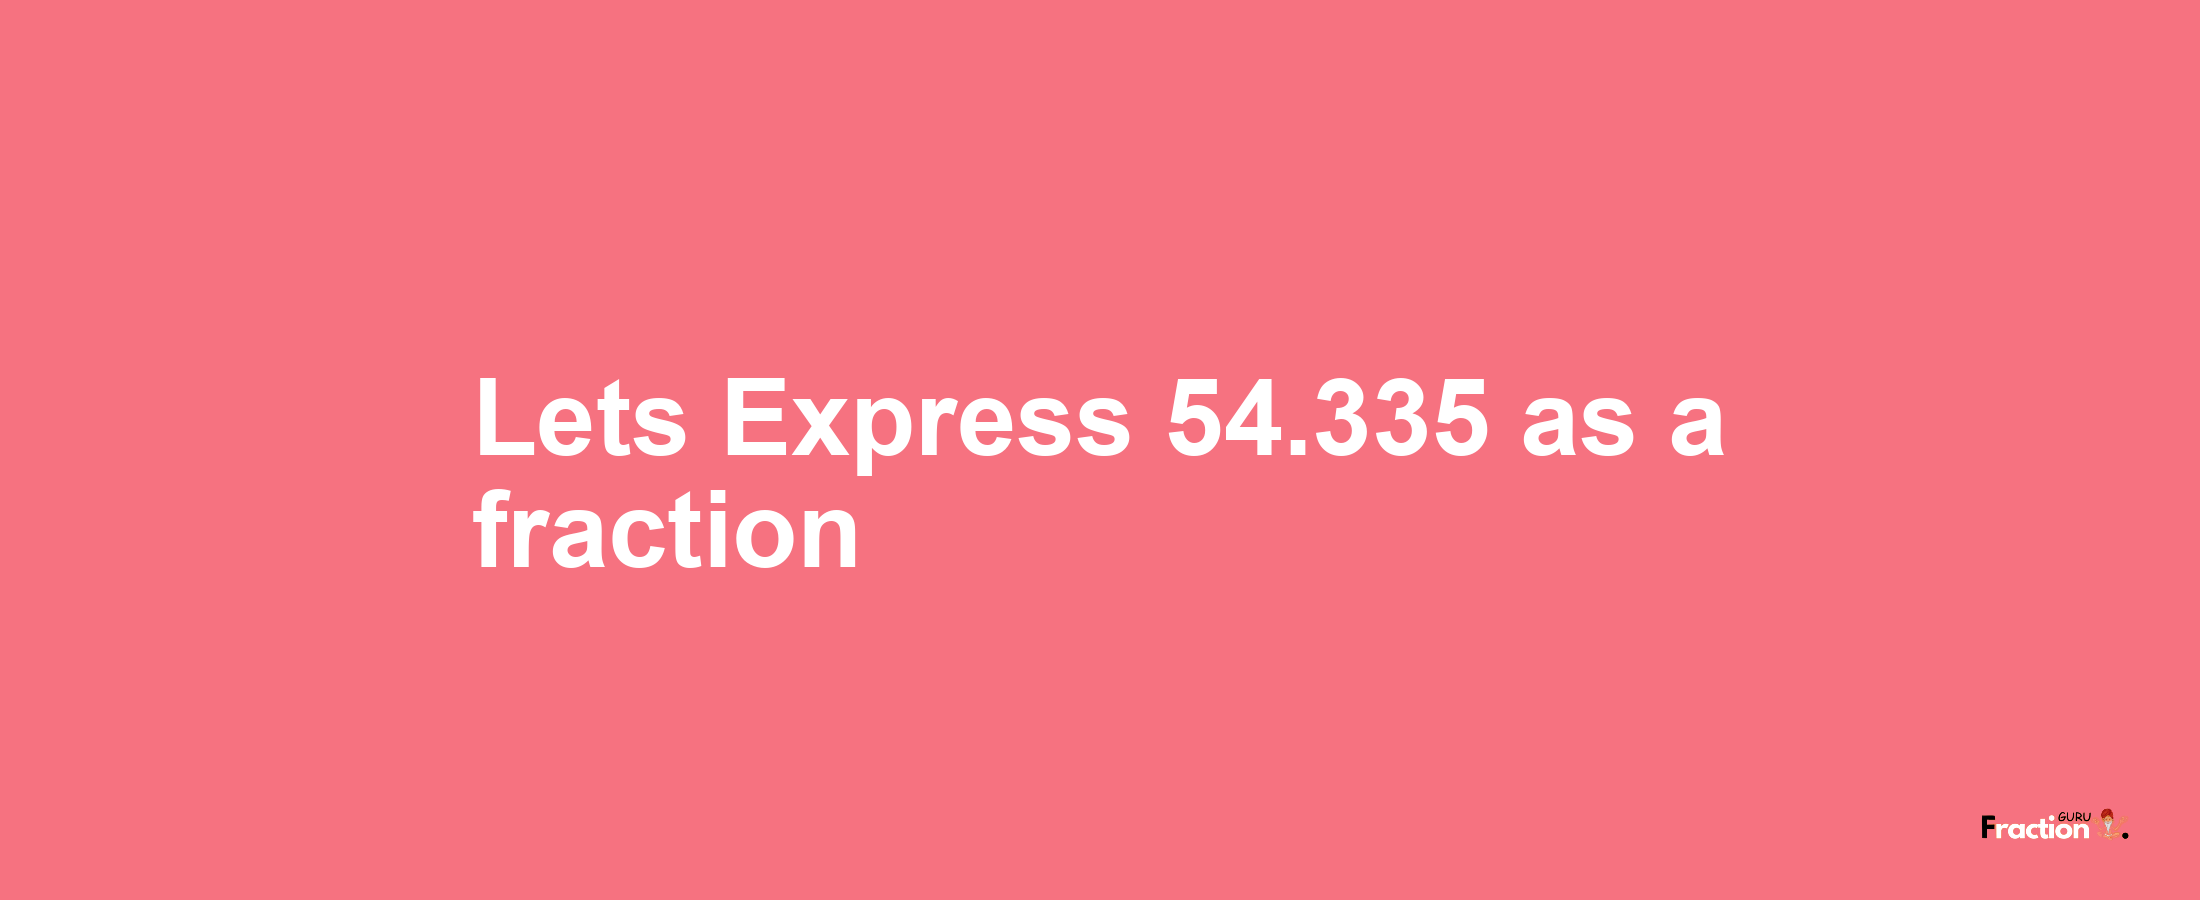 Lets Express 54.335 as afraction